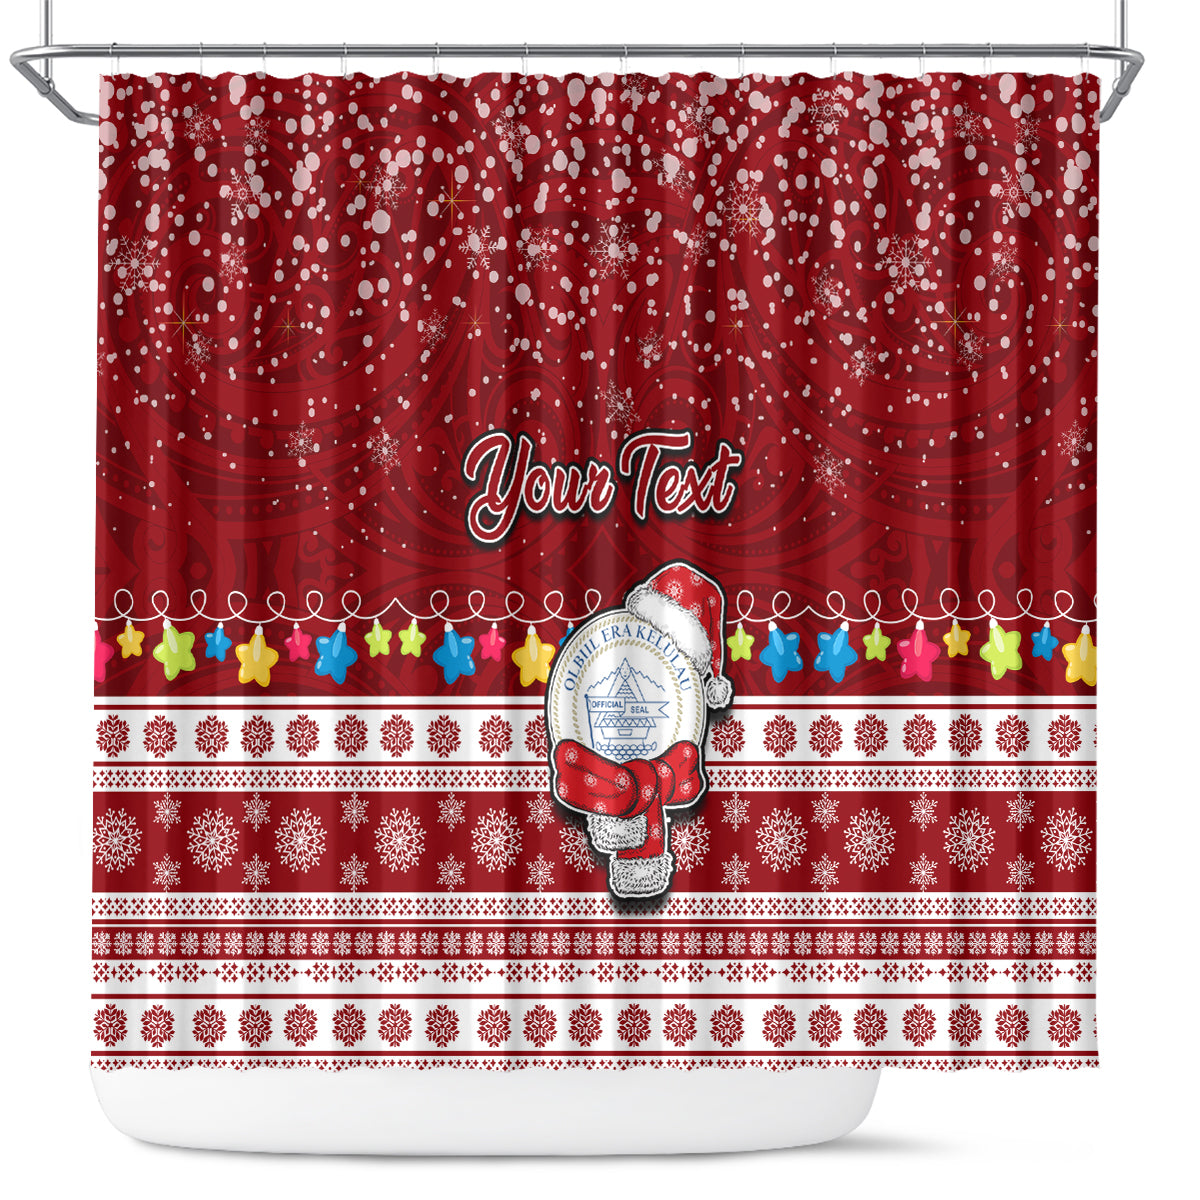 Personalised Palau Christmas Shower Curtain Snowman and Palau Coat of Arms Maori Tribal Xmas Style LT03 Red - Polynesian Pride